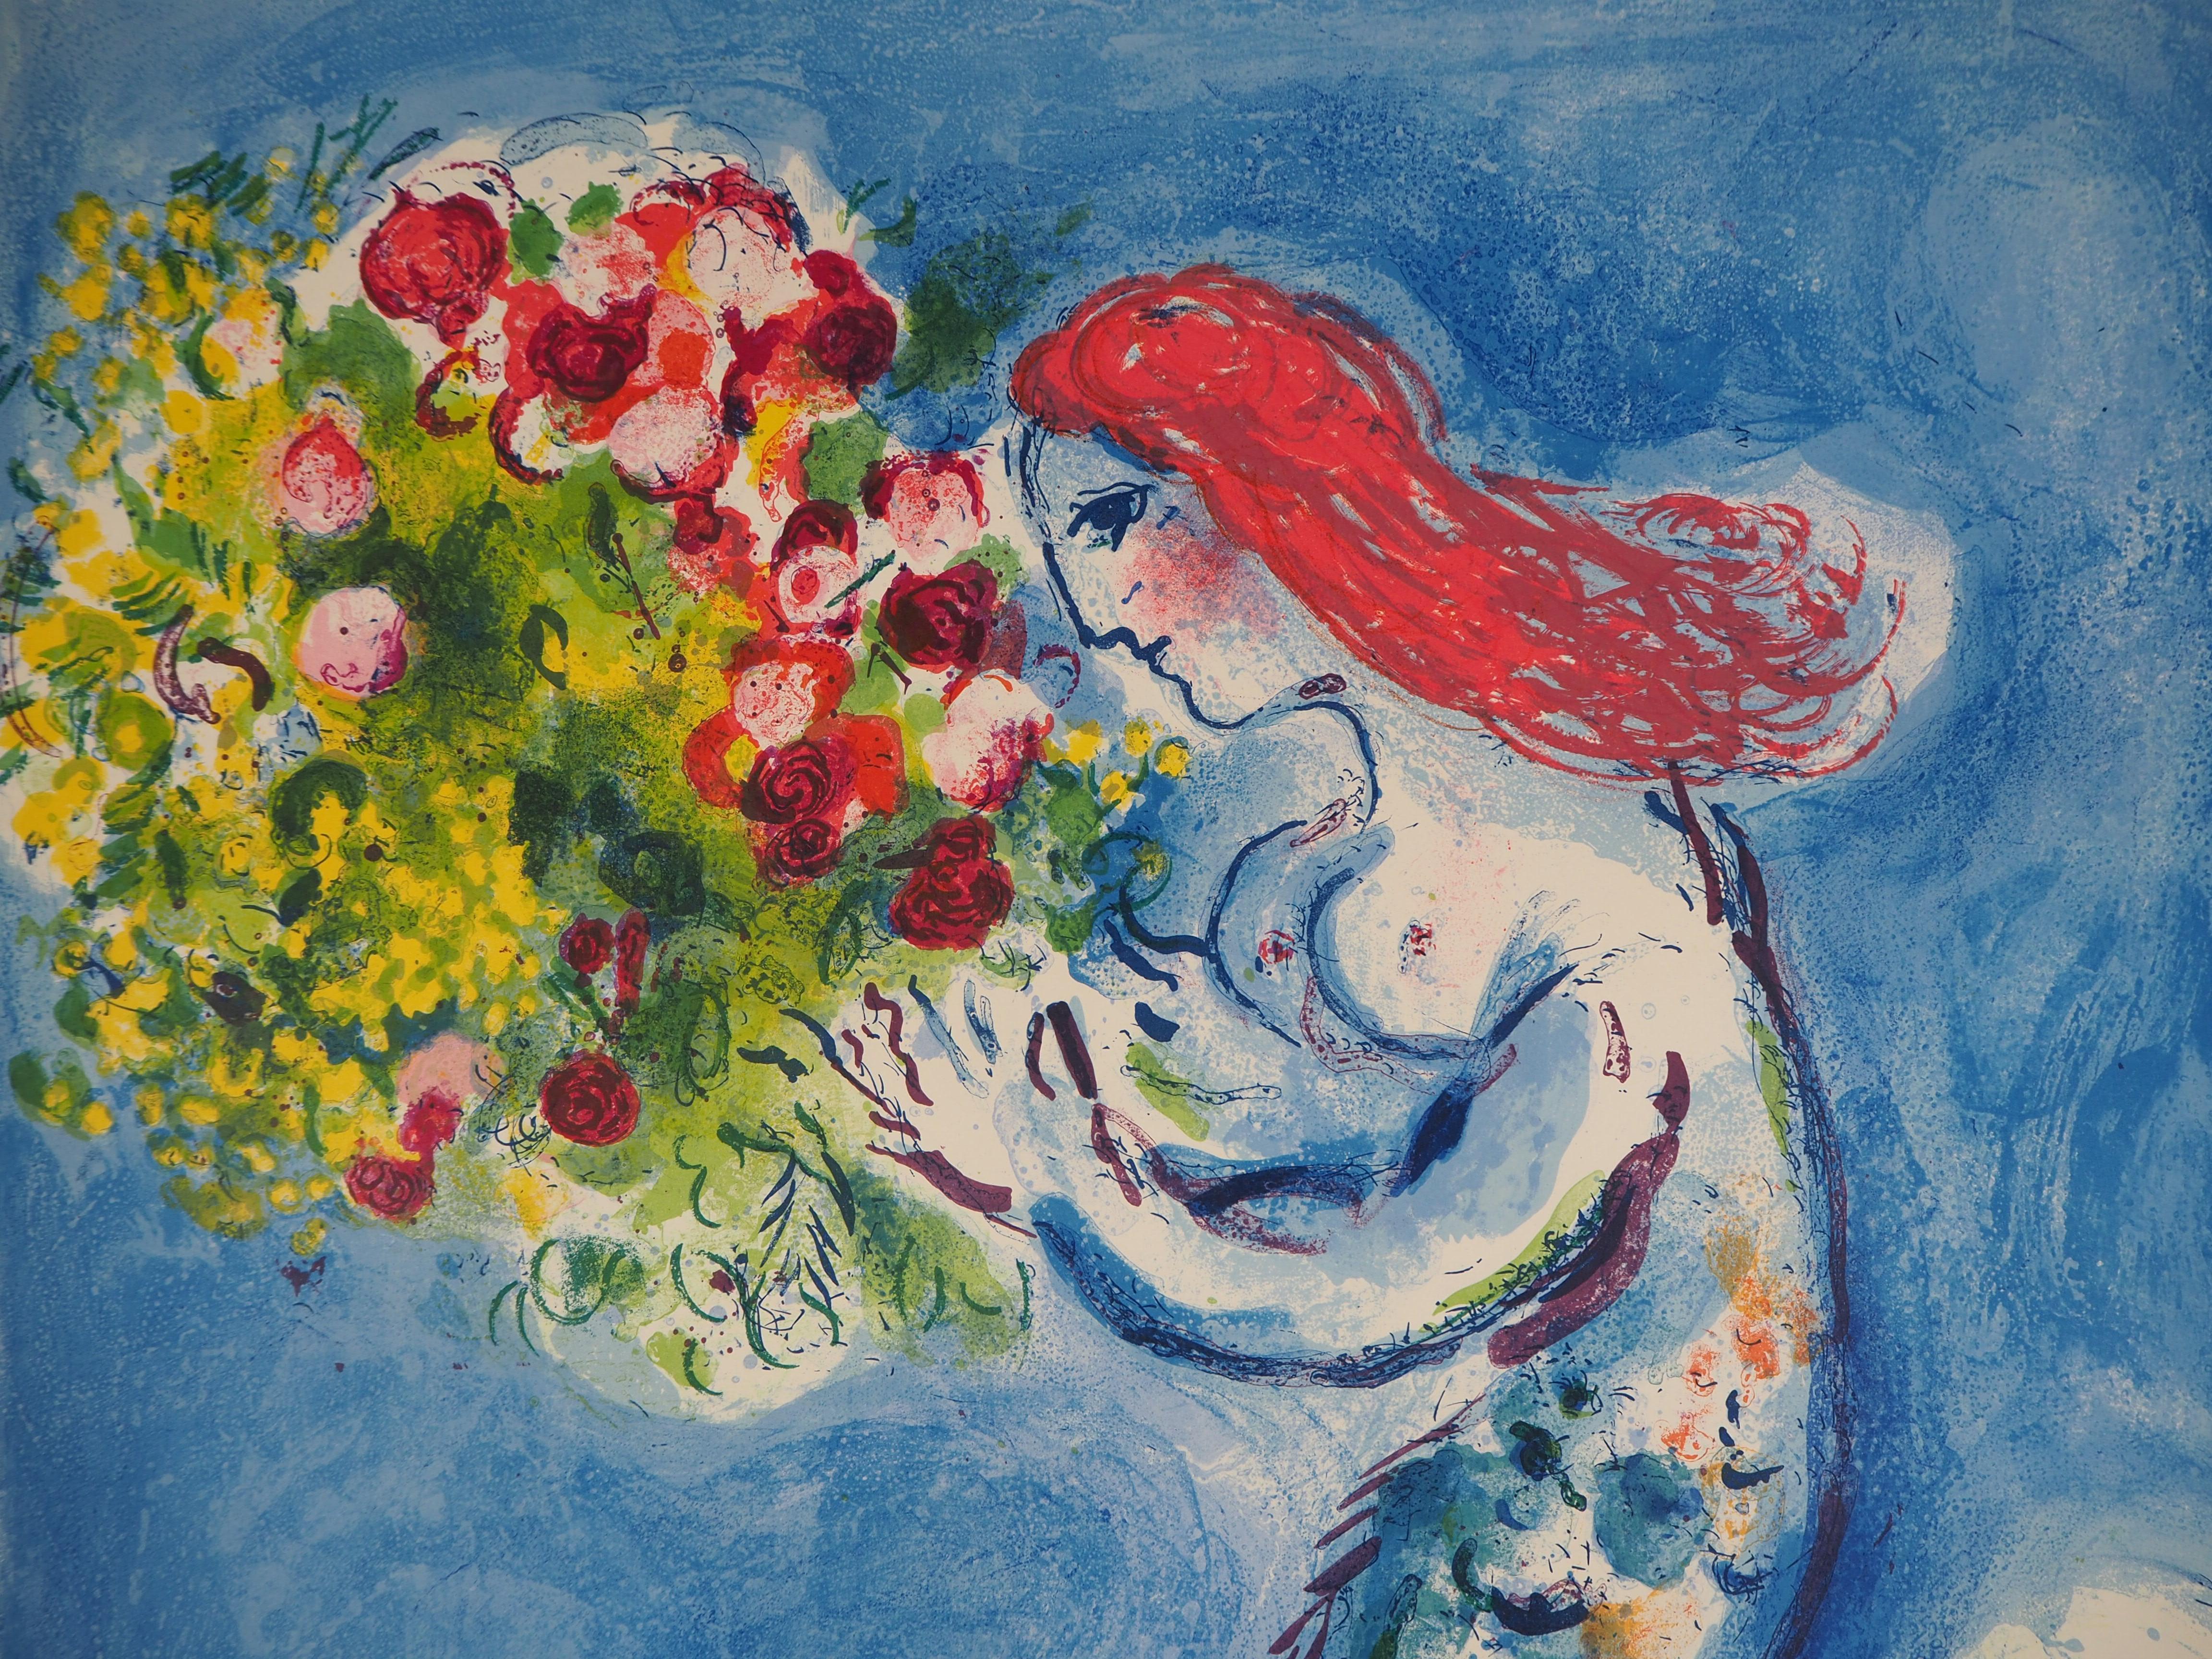 Nice, Bay of Angels - Original lithograph poster, Handsigned - Mourlot #350 - Surrealist Print by Marc Chagall